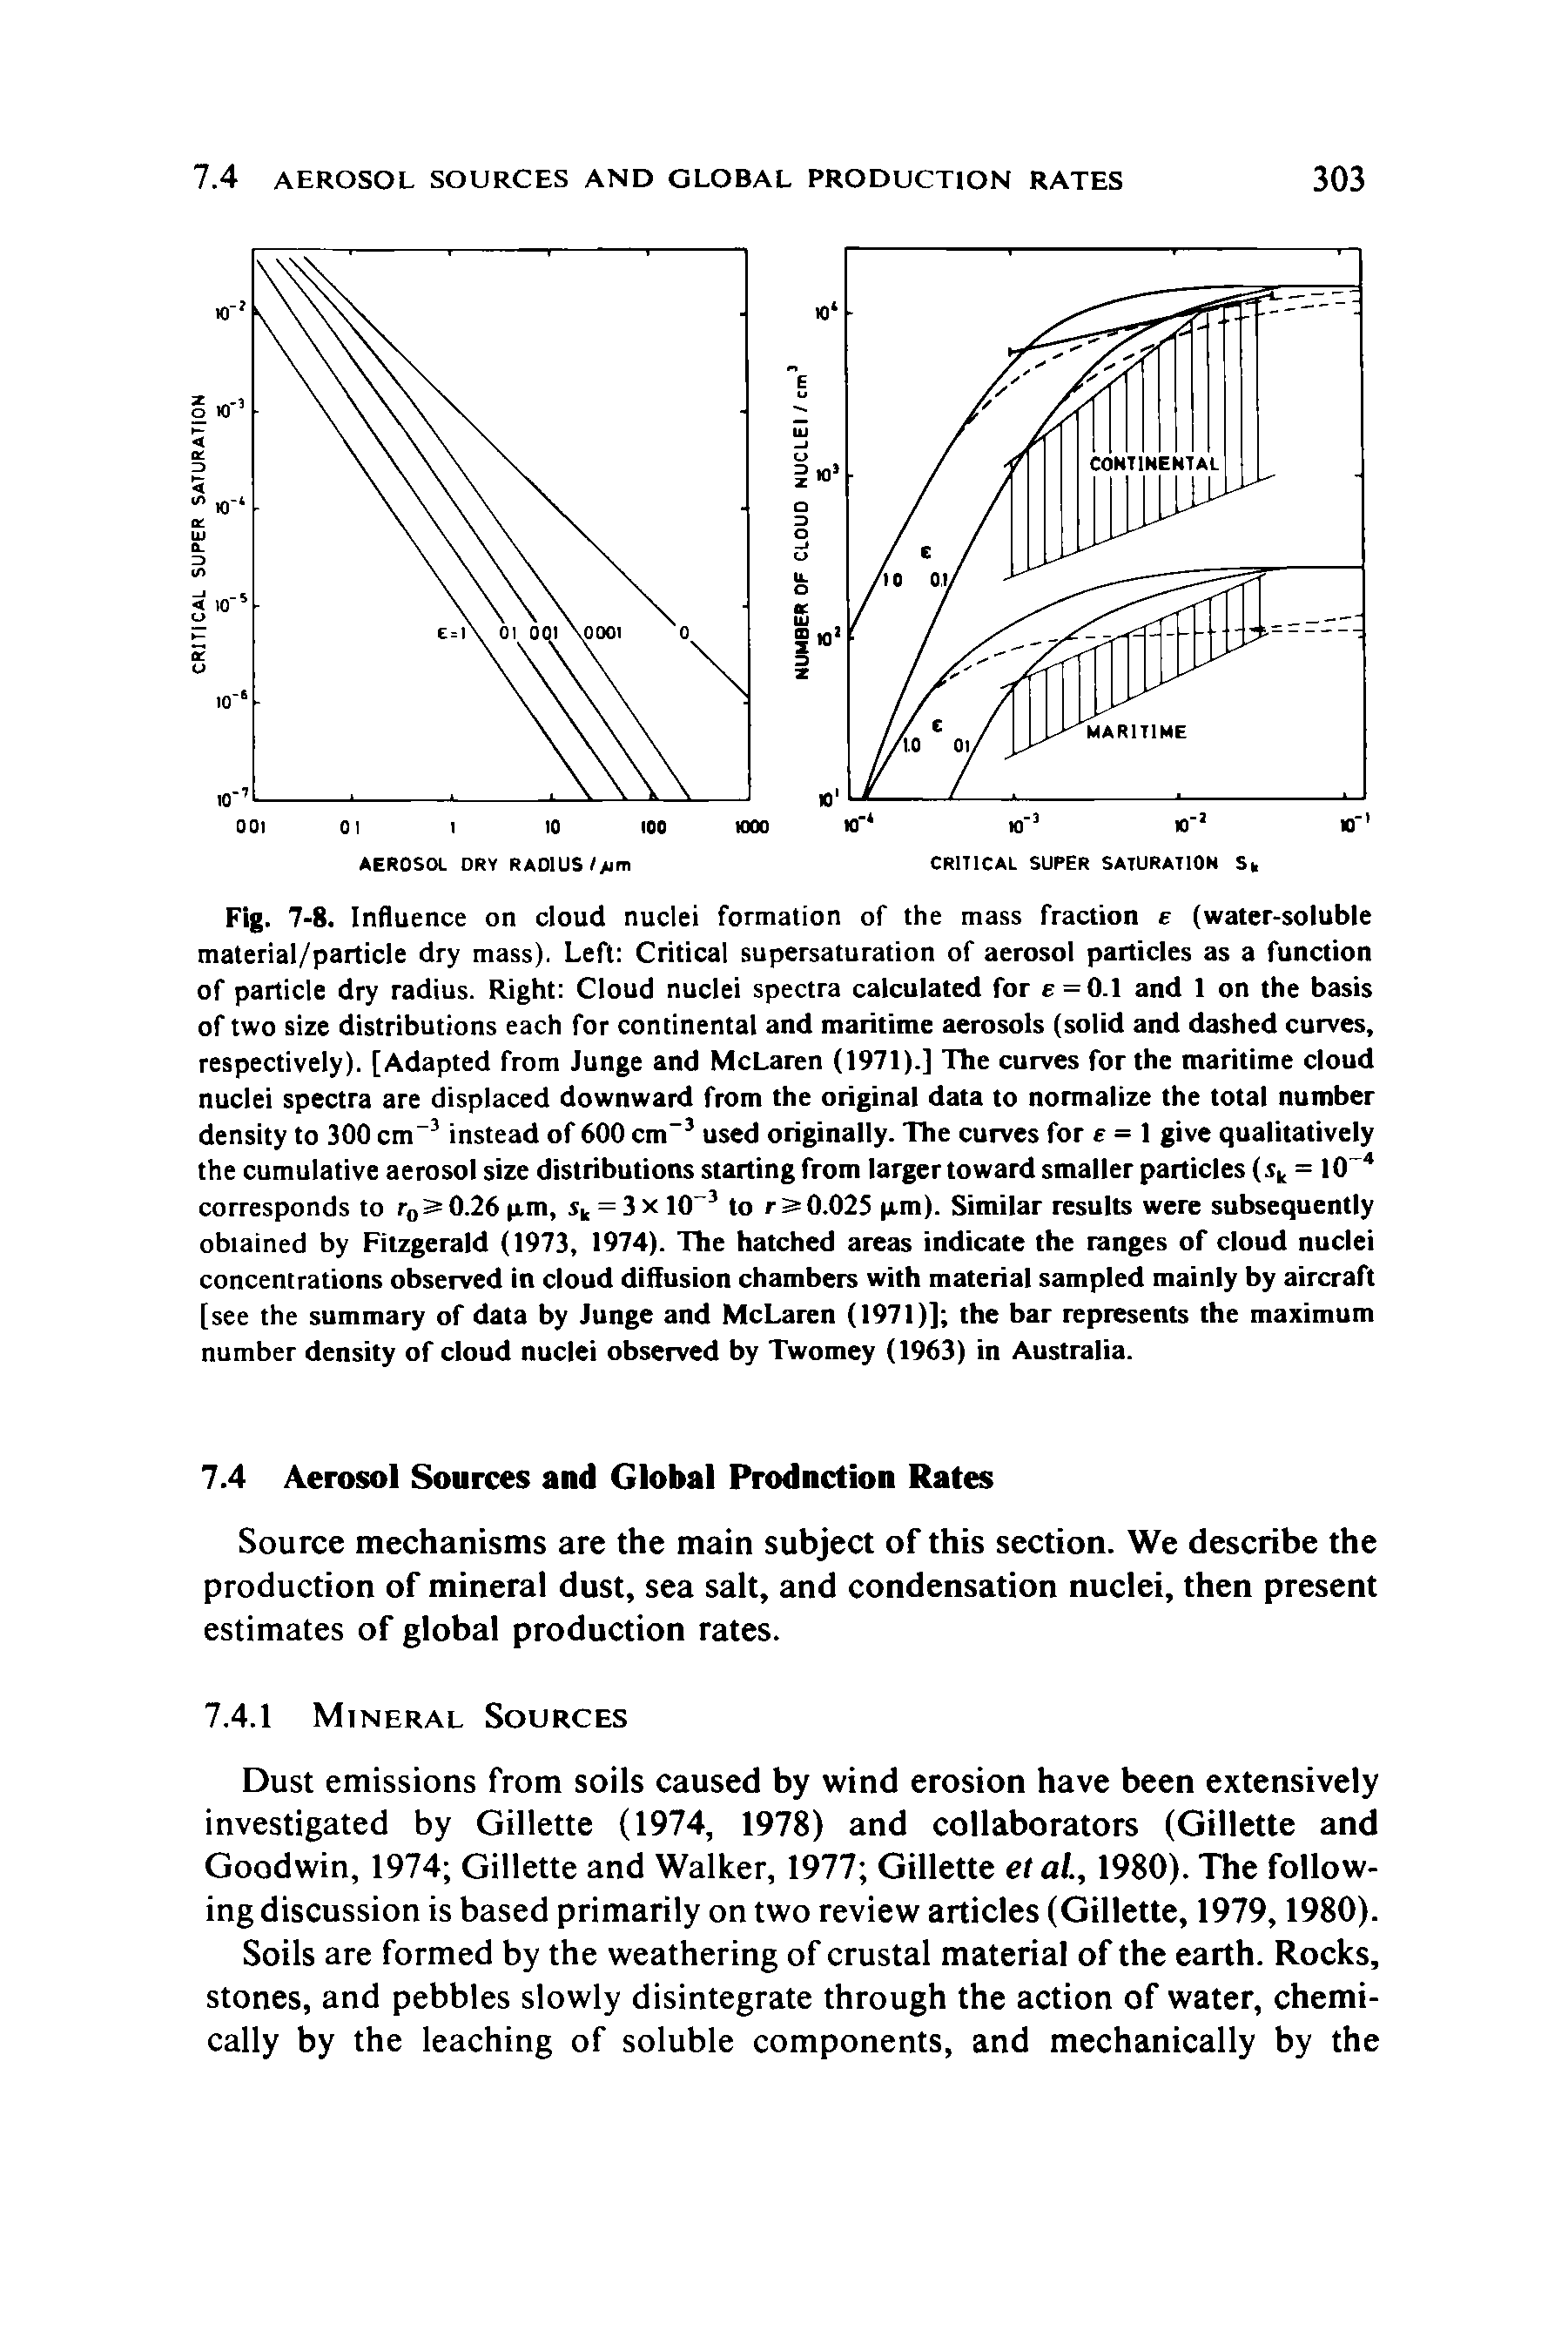 Fig. 7-8. Influence on cloud nuclei formation of the mass fraction e (water-soluble material/particle dry mass). Left Critical supersaturation of aerosol particles as a function of particle dry radius. Right Cloud nuclei spectra calculated for e = 0.1 and 1 on the basis of two size distributions each for continental and maritime aerosols (solid and dashed curves, respectively). [Adapted from Junge and McLaren (1971).] The curves for the maritime cloud nuclei spectra are displaced downward from the original data to normalize the total number density to 300 cm-3 instead of 600 cm-3 used originally. The curves for e = 1 give qualitatively the cumulative aerosol size distributions starting from larger toward smaller particles (sk = 10 4 corresponds to r0 0.26 p.m, sk = 3 x 10 3 to rs 0.025 Atn). Similar results were subsequently obtained by Fitzgerald (1973, 1974). The hatched areas indicate the ranges of cloud nuclei concentrations observed in cloud diffusion chambers with material sampled mainly by aircraft [see the summary of data by Junge and McLaren (1971)] the bar represents the maximum number density of cloud nuclei observed by Twomey (1963) in Australia.